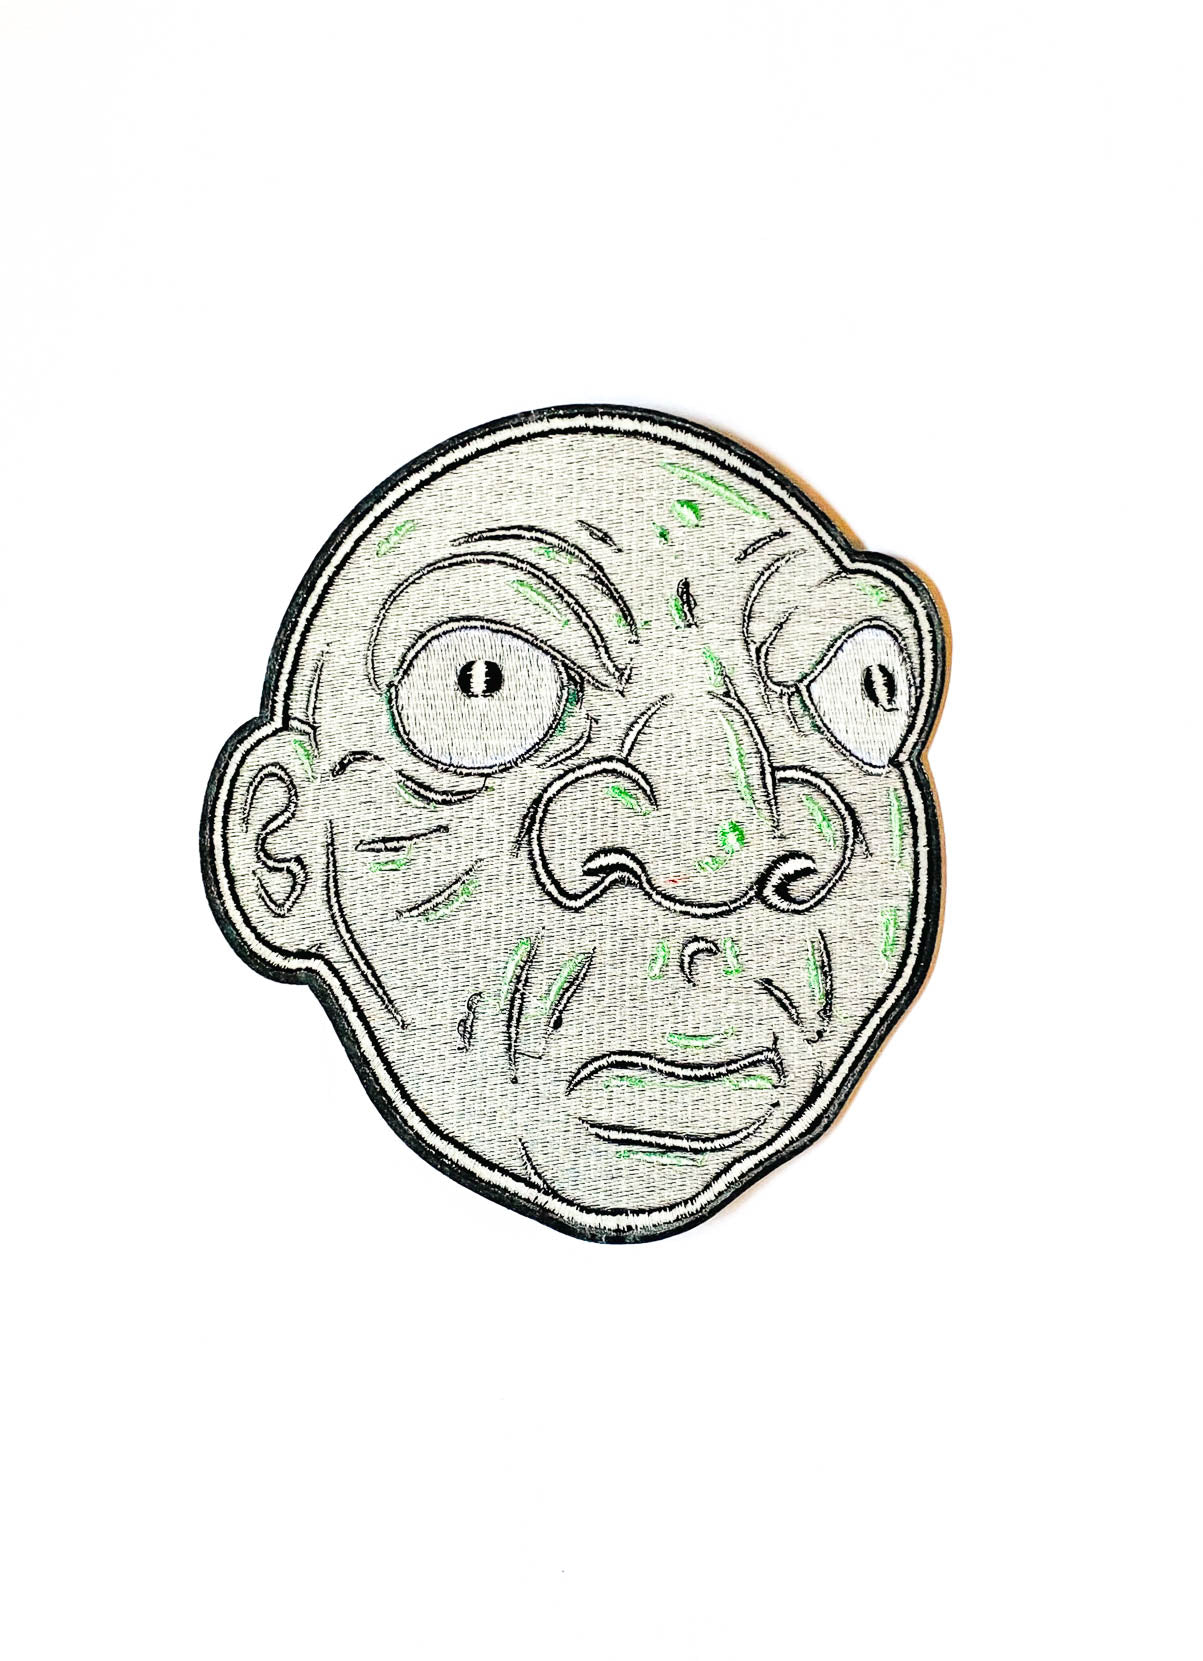 Green Glass Face Patch